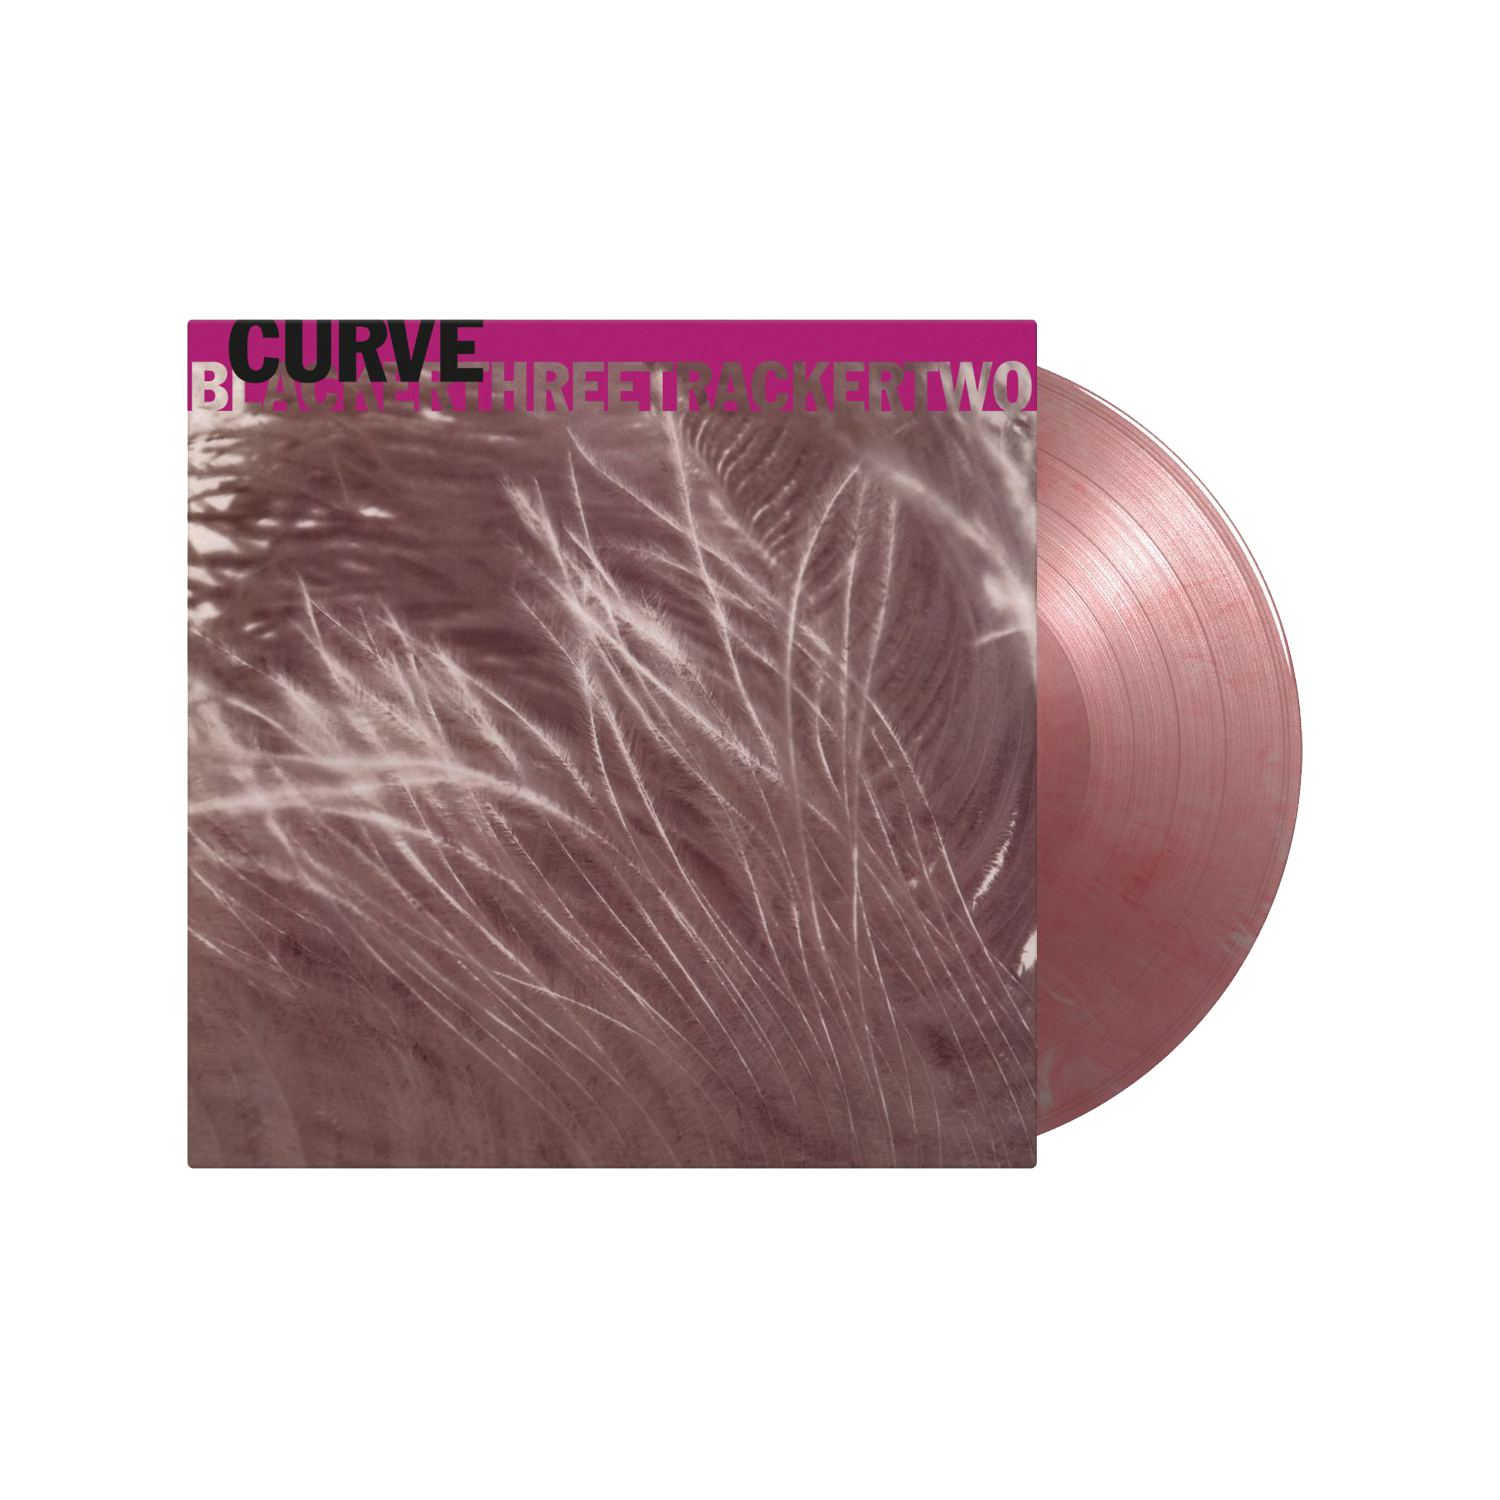 Curve - Blackerthreetrackertwo: Silver + Red Marbled Vinyl EP